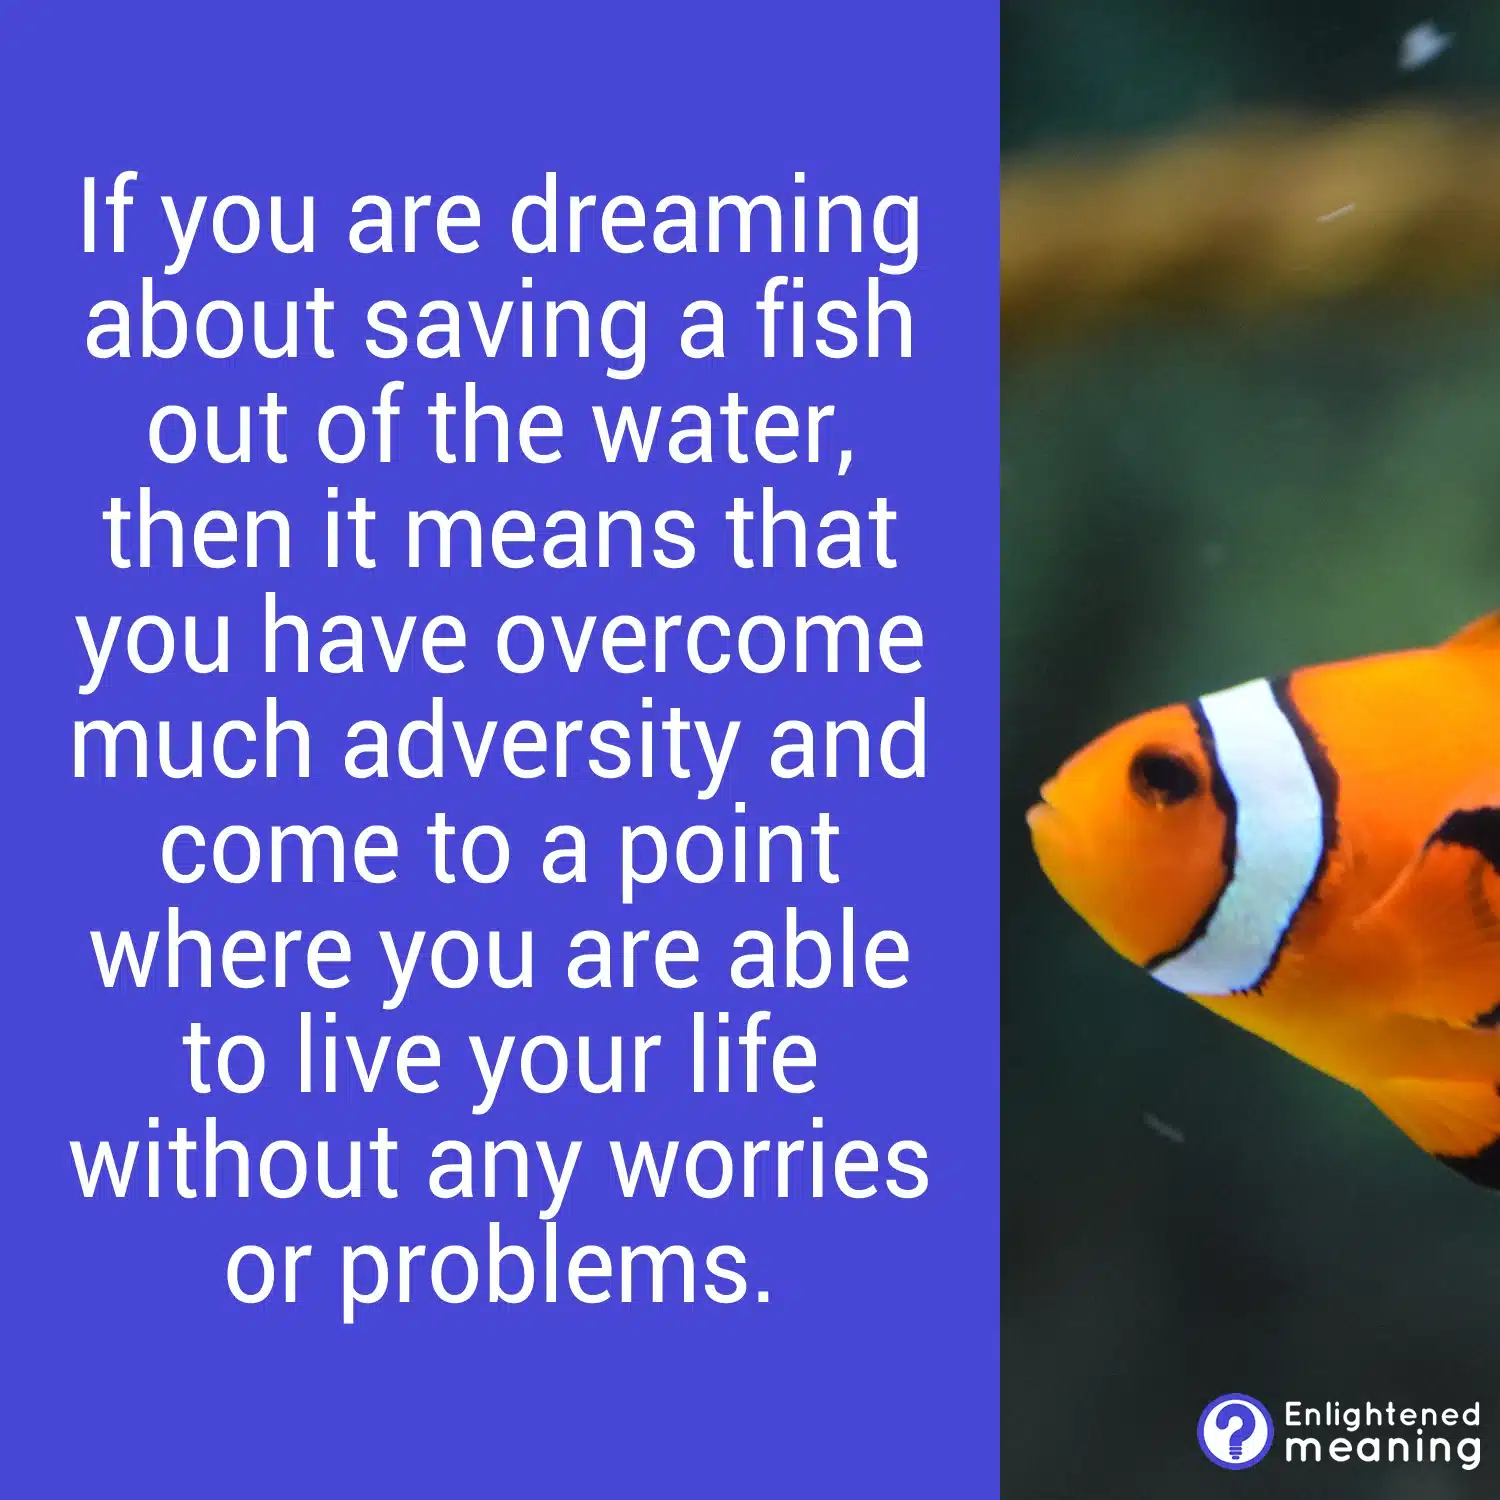 Fish dream meaning and symbolism